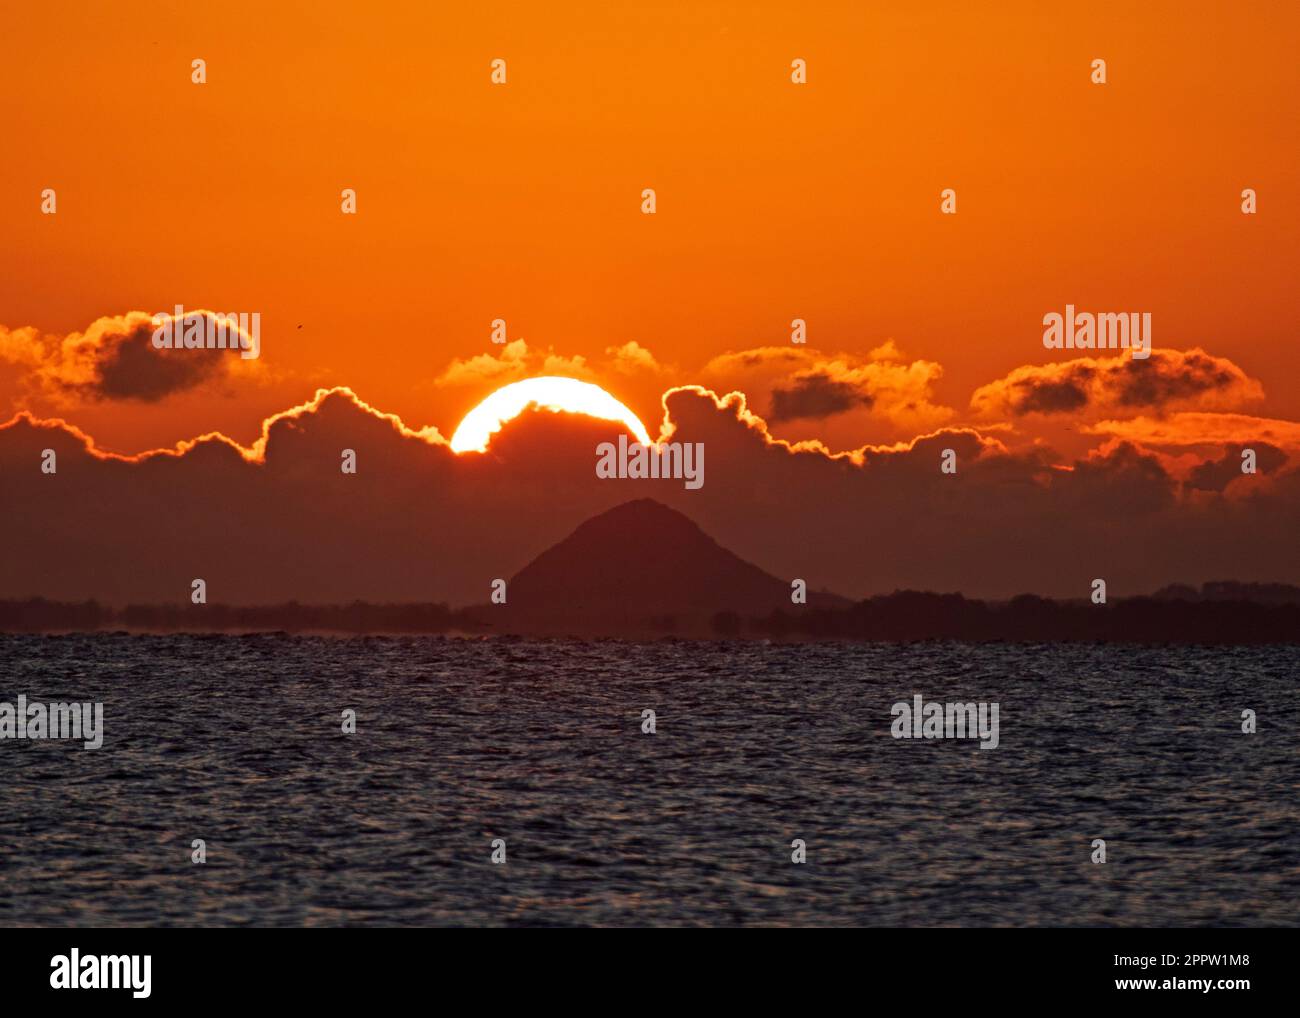 Portobello, Edinburgh, Scotland, UK. 25th April 2023. A nippy sunrise 2 degrees at dawn by the Firth of Forth with the sun slowly rising over the dark clouds on the horizon. Pictured: Berwick Law in the distance. Credit: Arch White/alamy live news. Stock Photo